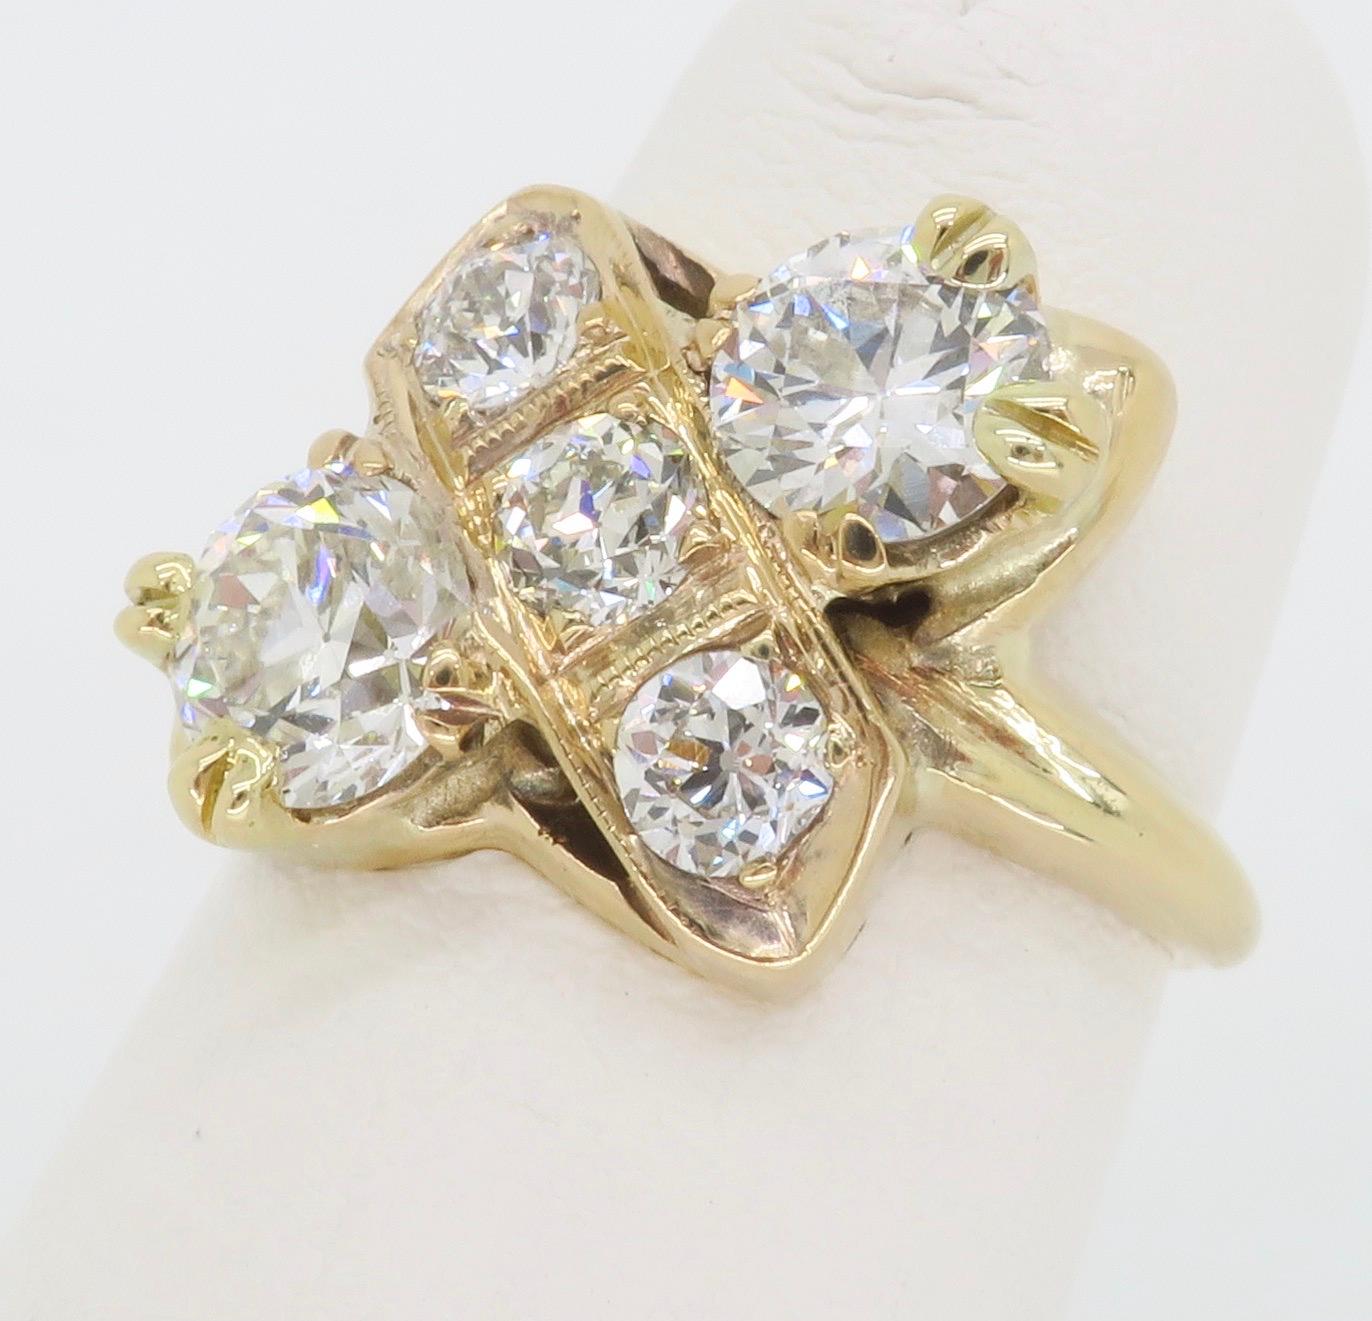 Round Cut Moi-et-Toi Diamond Ring Made in 14k Yellow Gold